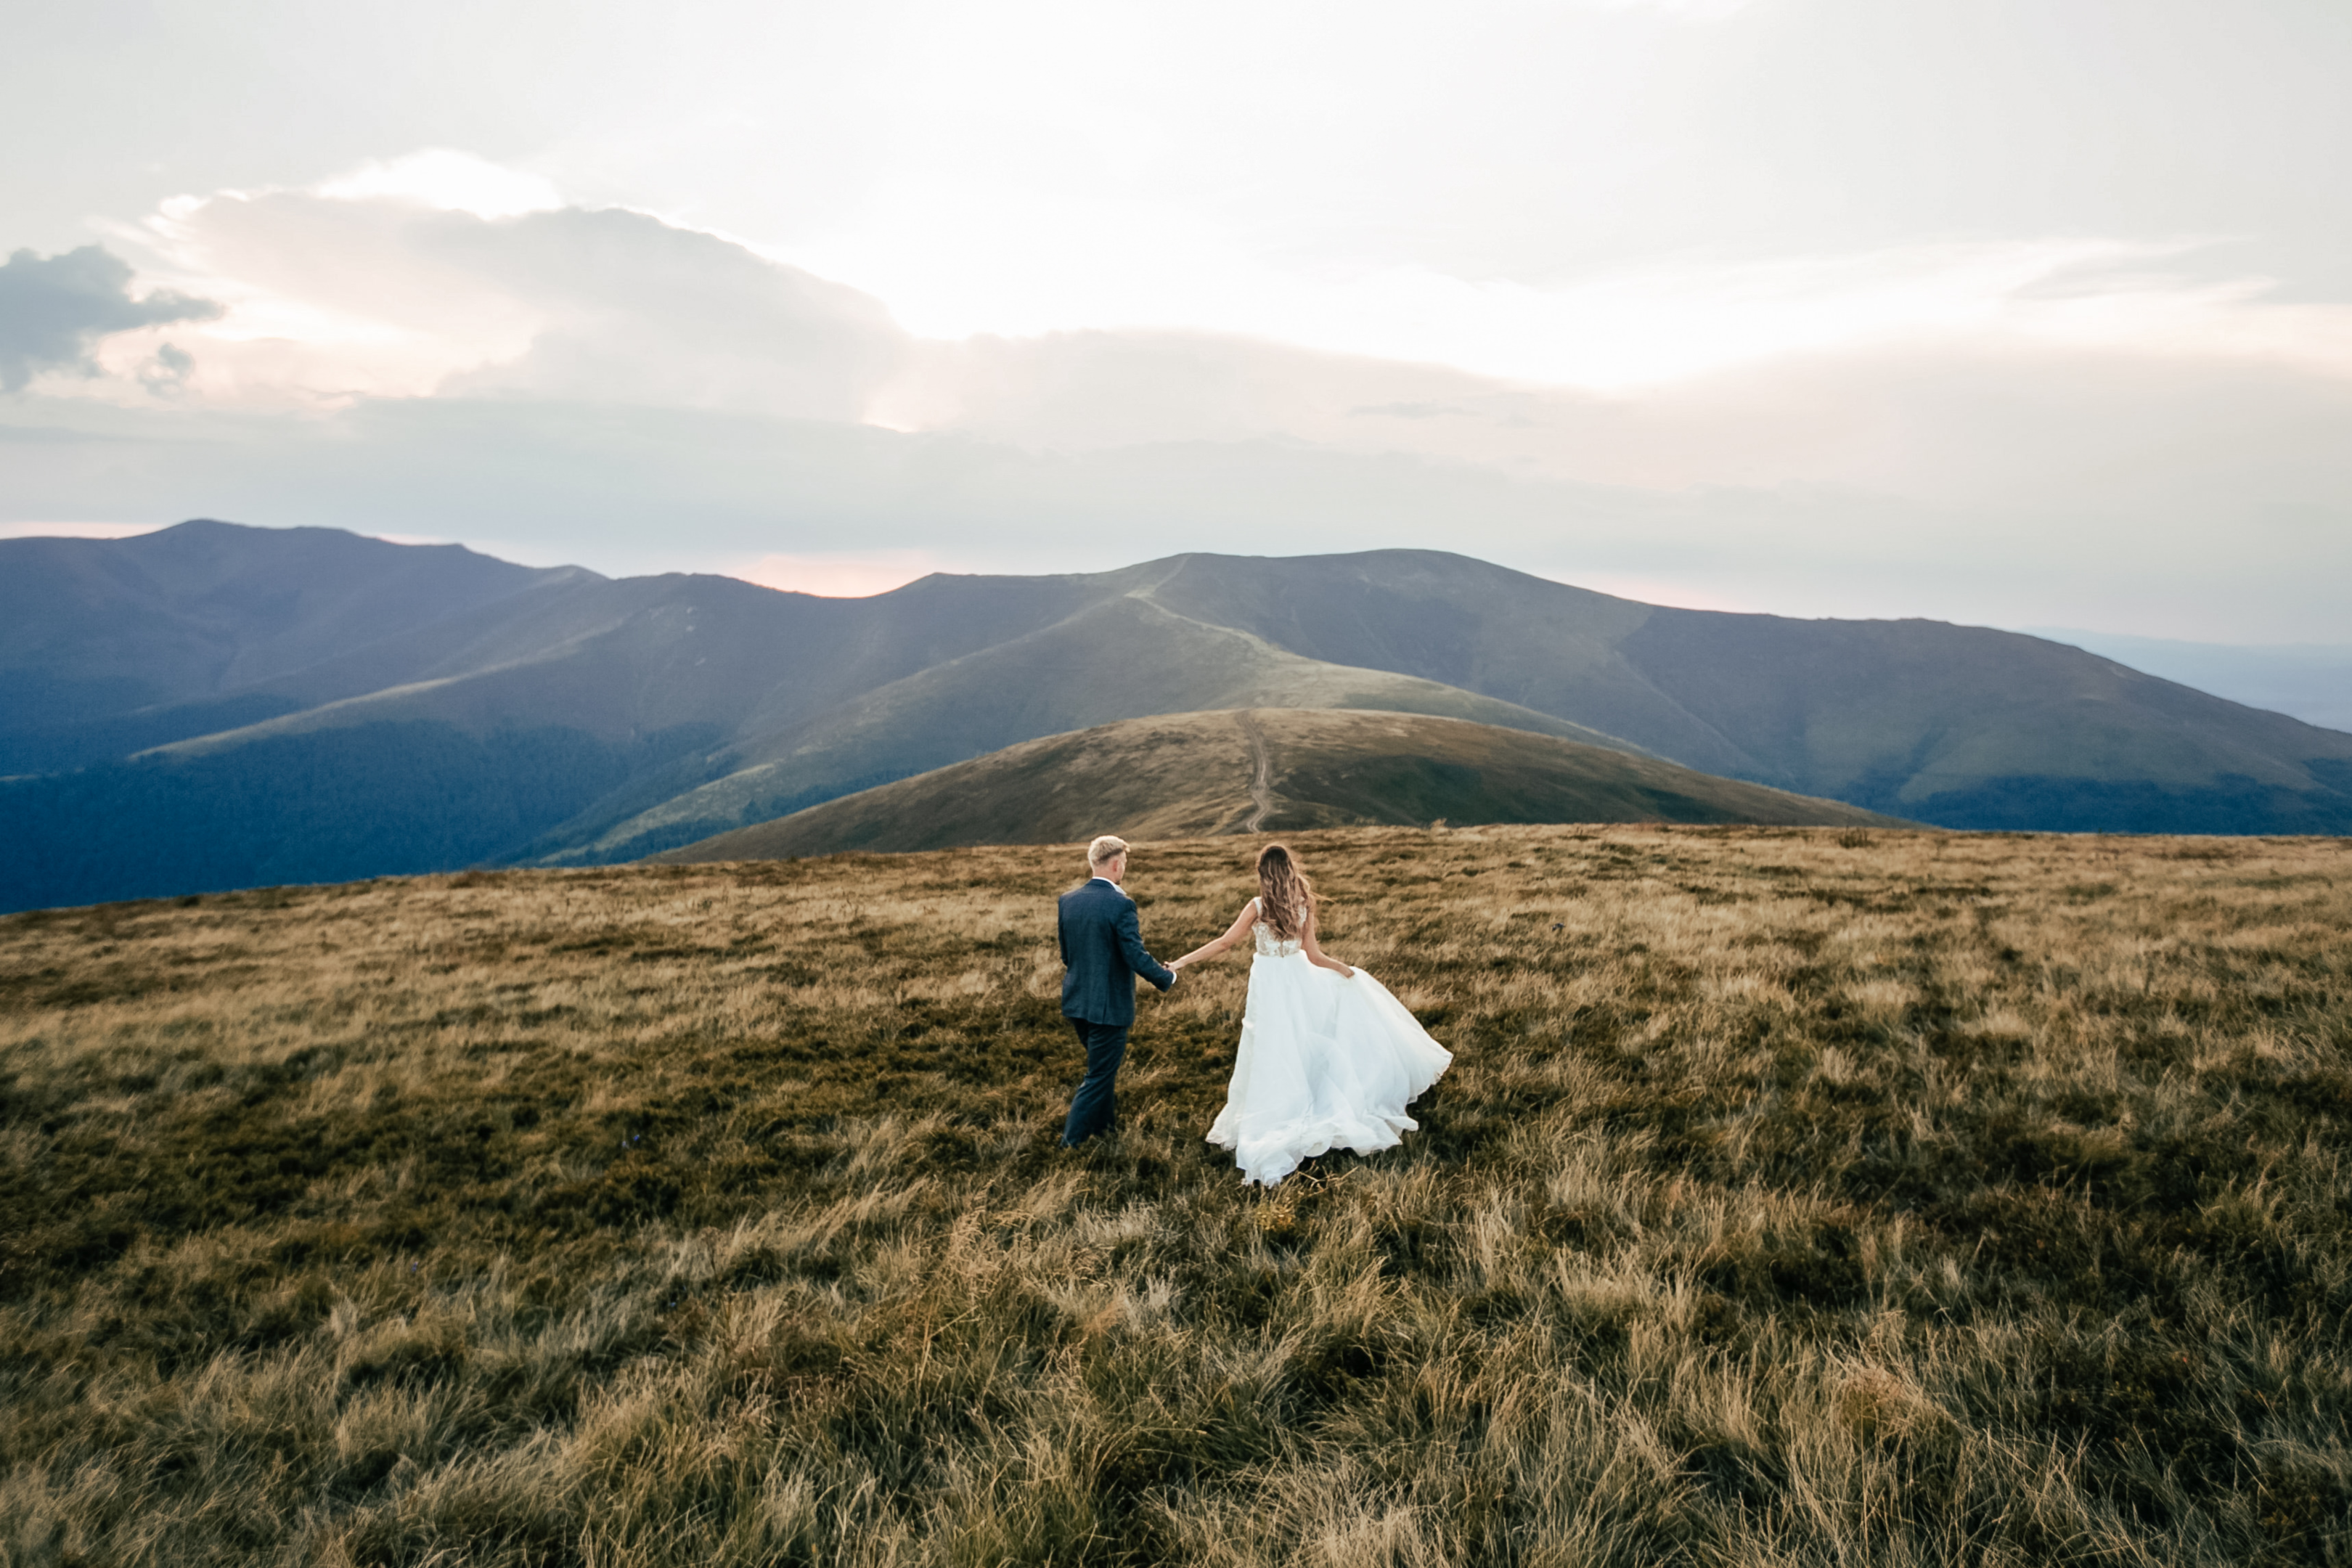 A couple standing on a mountain peak with a beautiful view, on a hiking adventure elopement